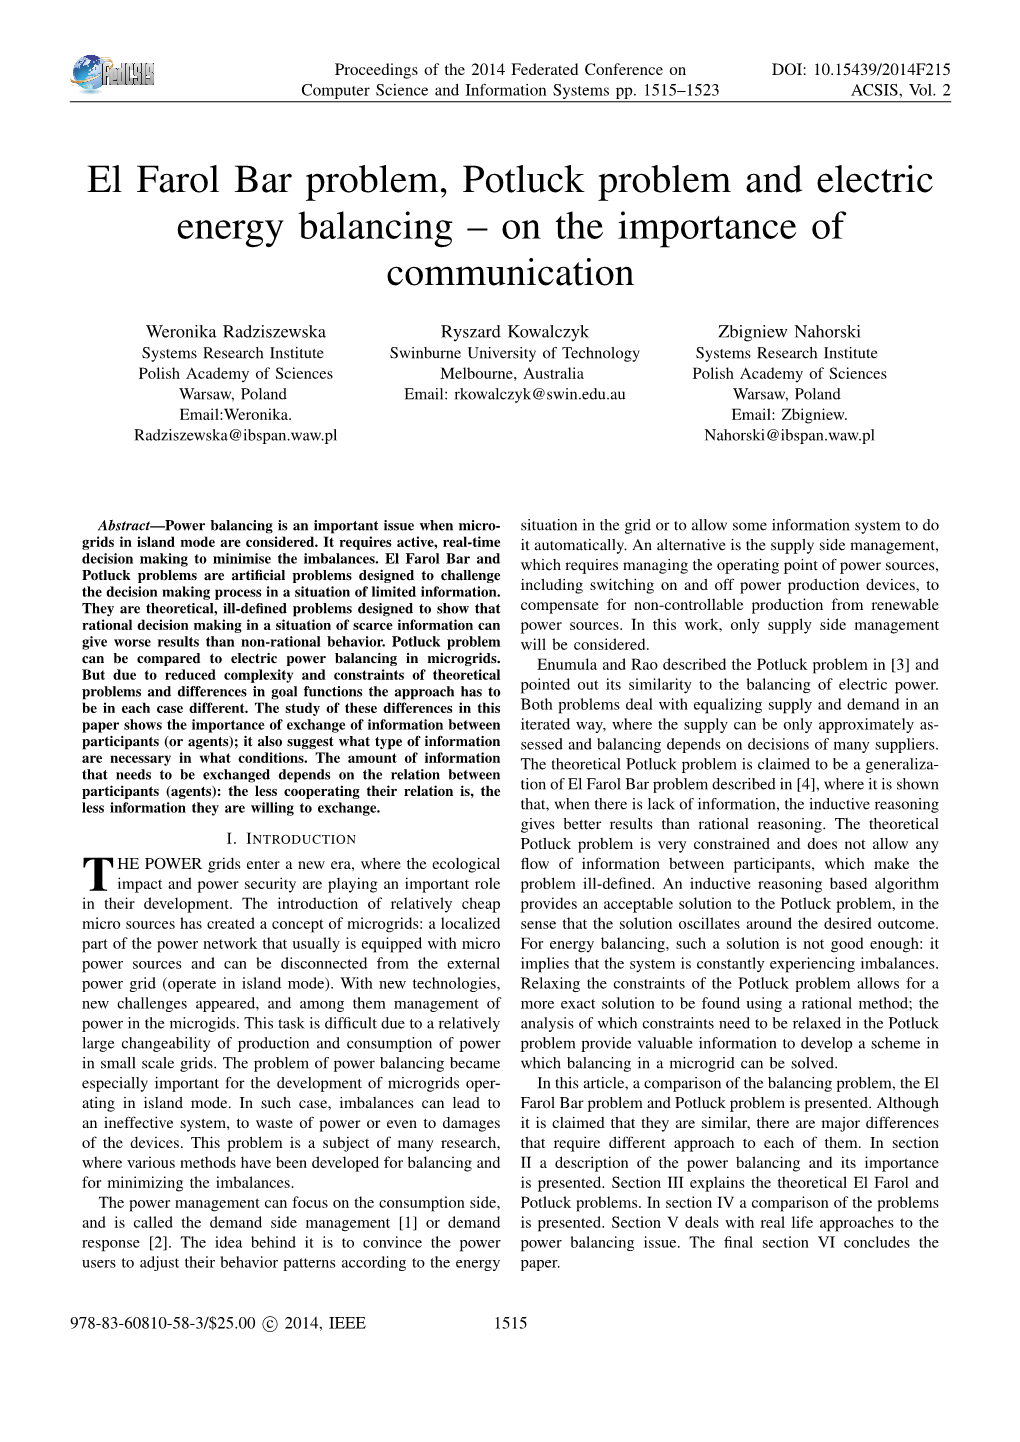 El Farol Bar Problem, Potluck Problem and Electric Energy Balancing – on the Importance of Communication